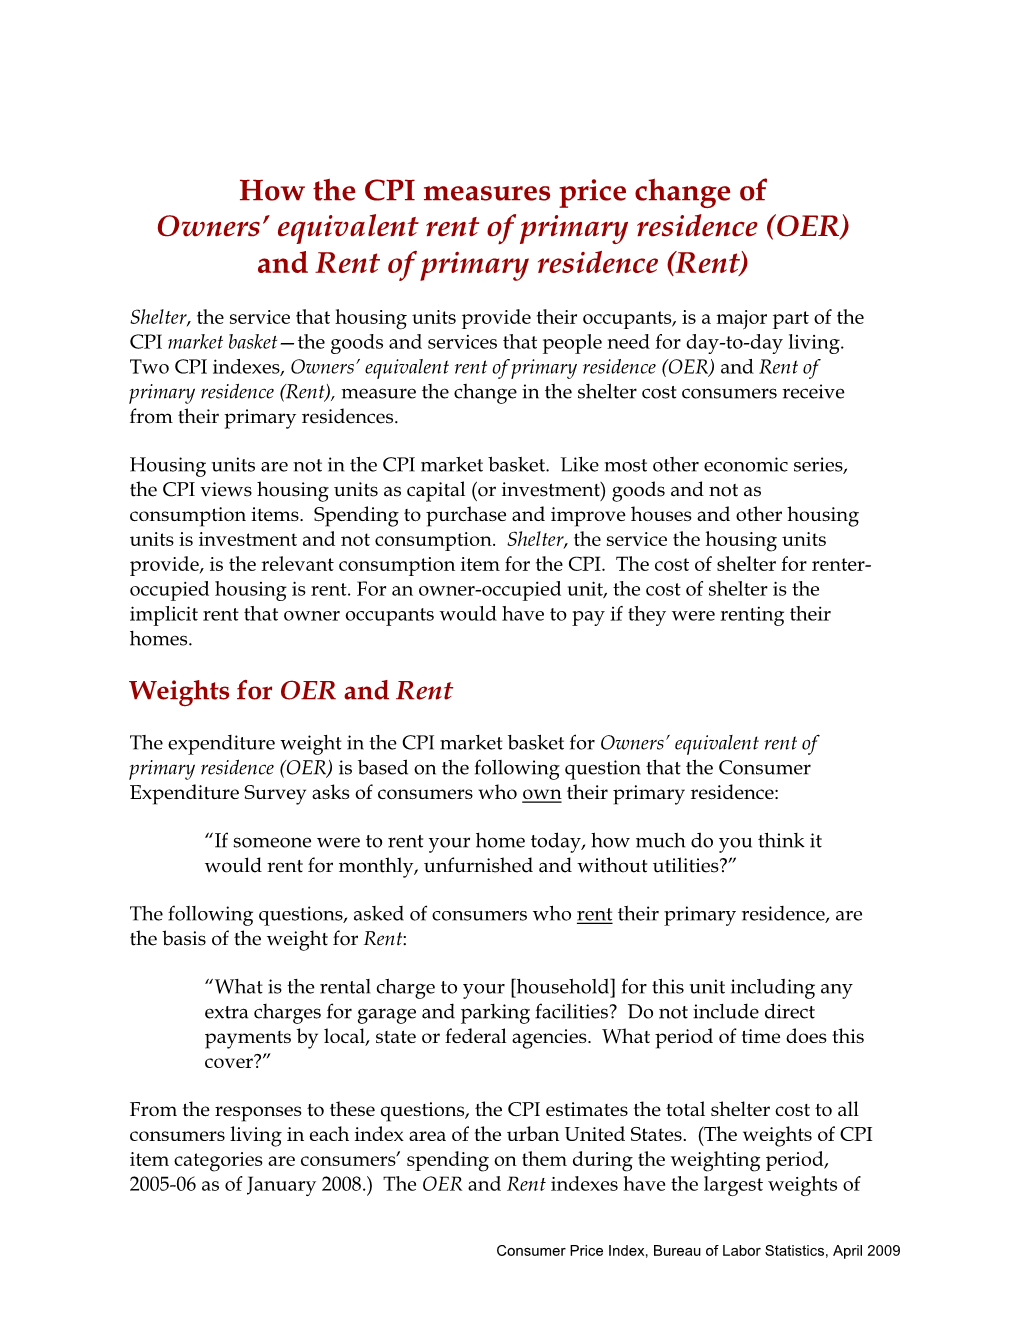 How the CPI Measures Price Change of Owners' Equivalent Rent Of